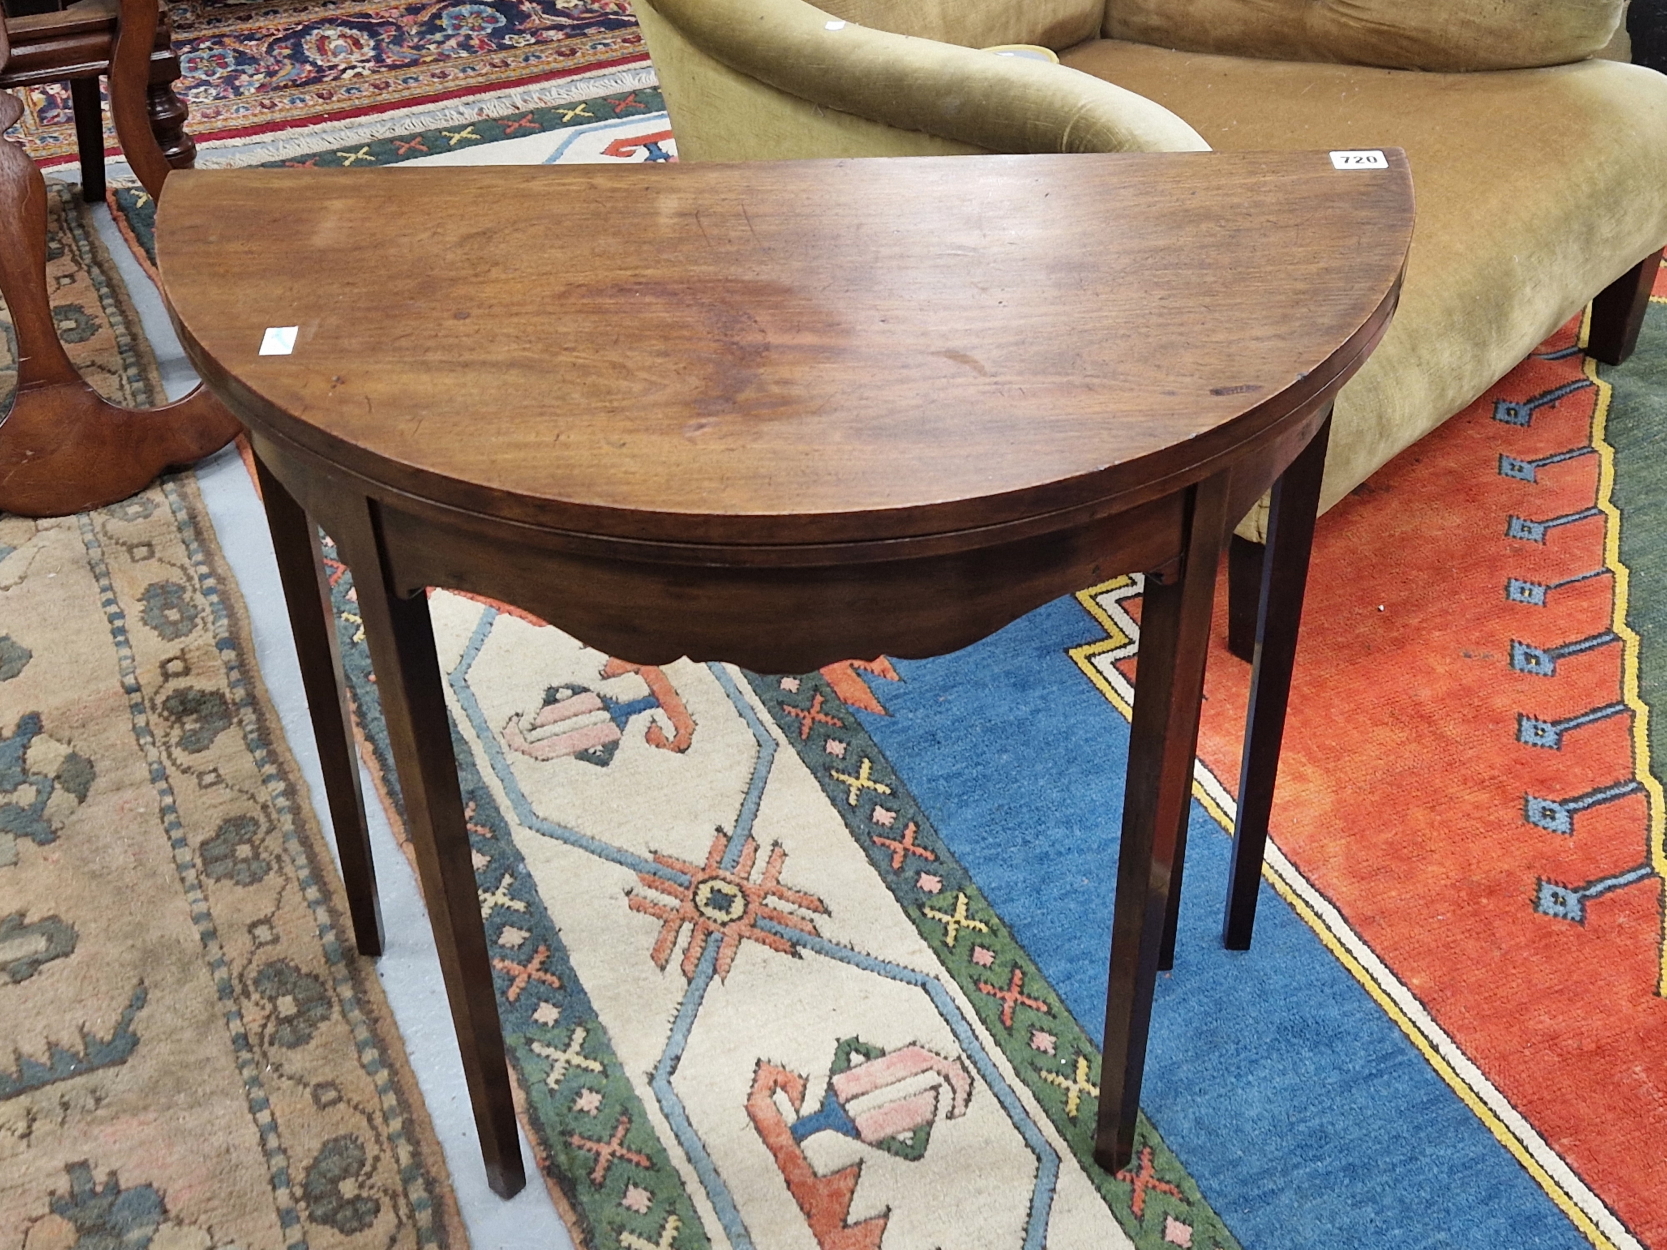 A MAHOGANY D-SHAPED GAMES TABLE OPENING ON ONE OF THE TAPERING SQUARE LEGS. W 75 x D 37 CLOSED x H